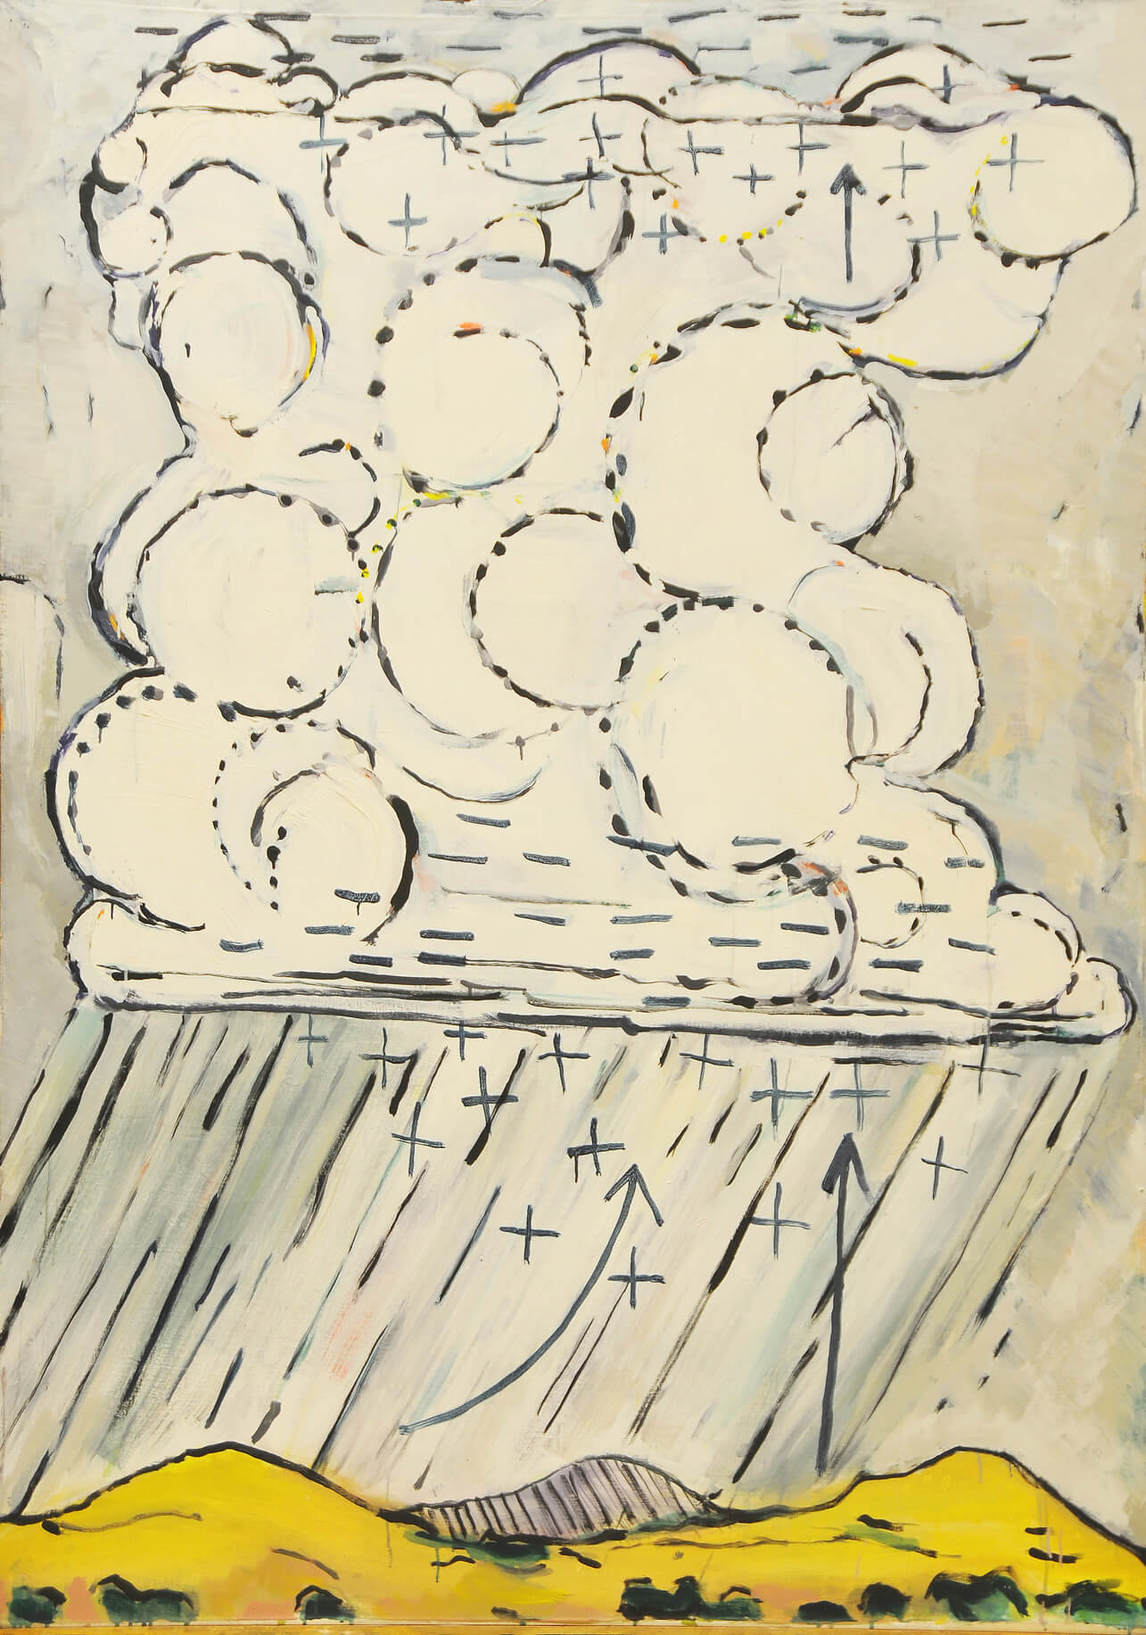 Thunder Cloud as Generator #1, 1971, by Paterson Ewen